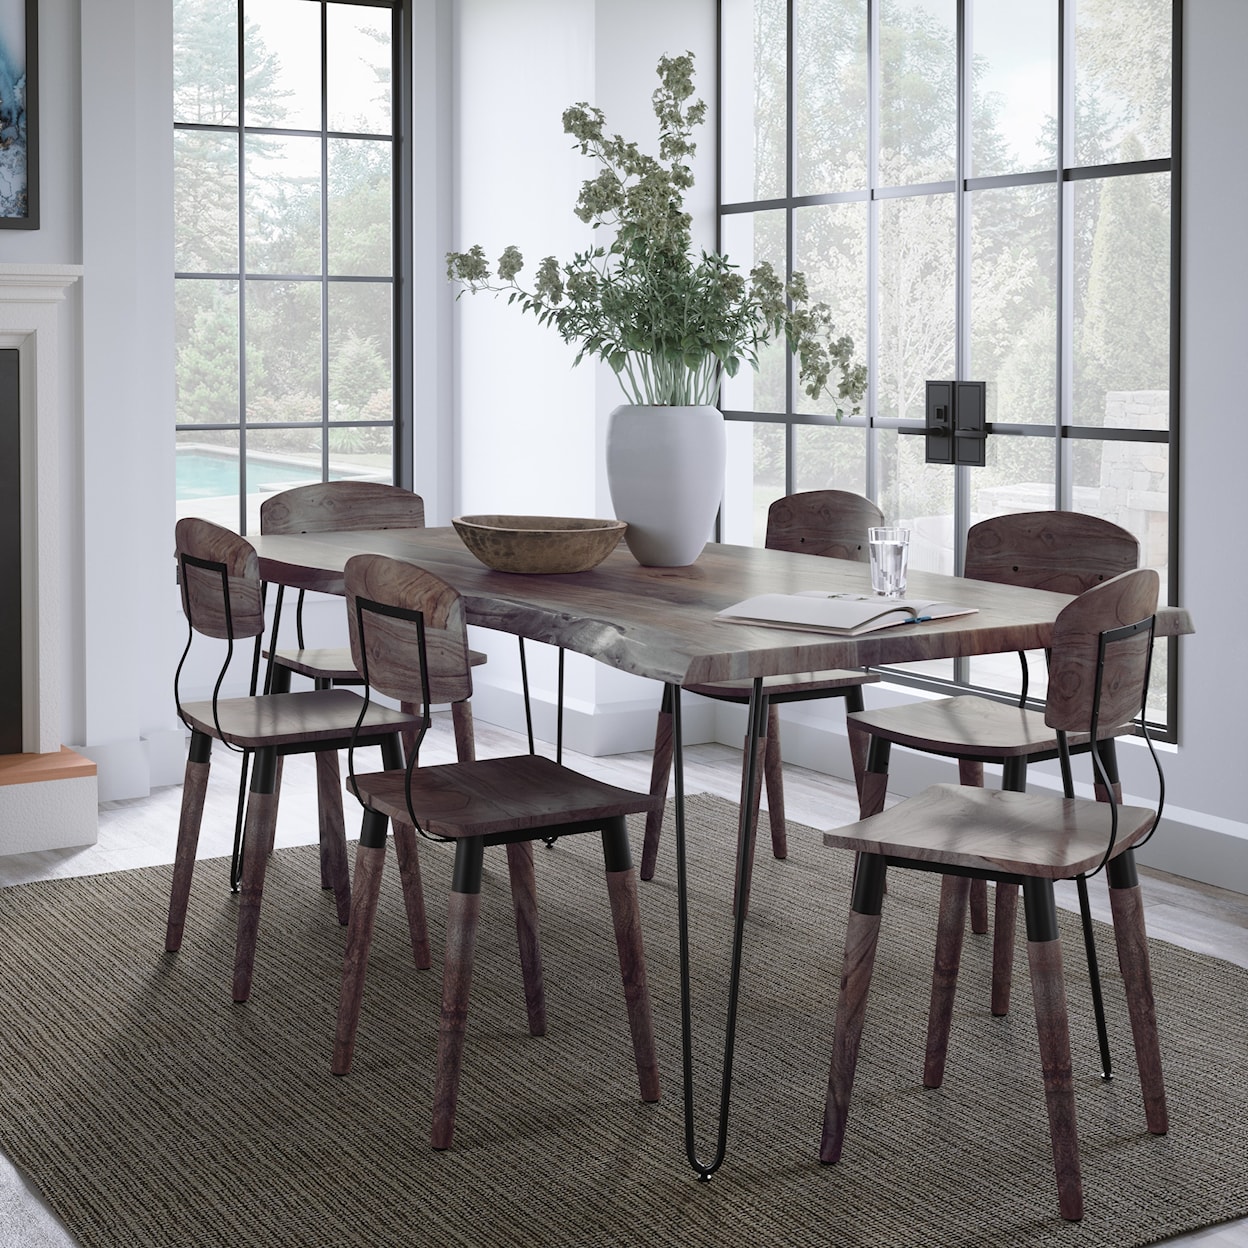 VFM Signature Nature's Edge 7-Piece Table and Chair Set